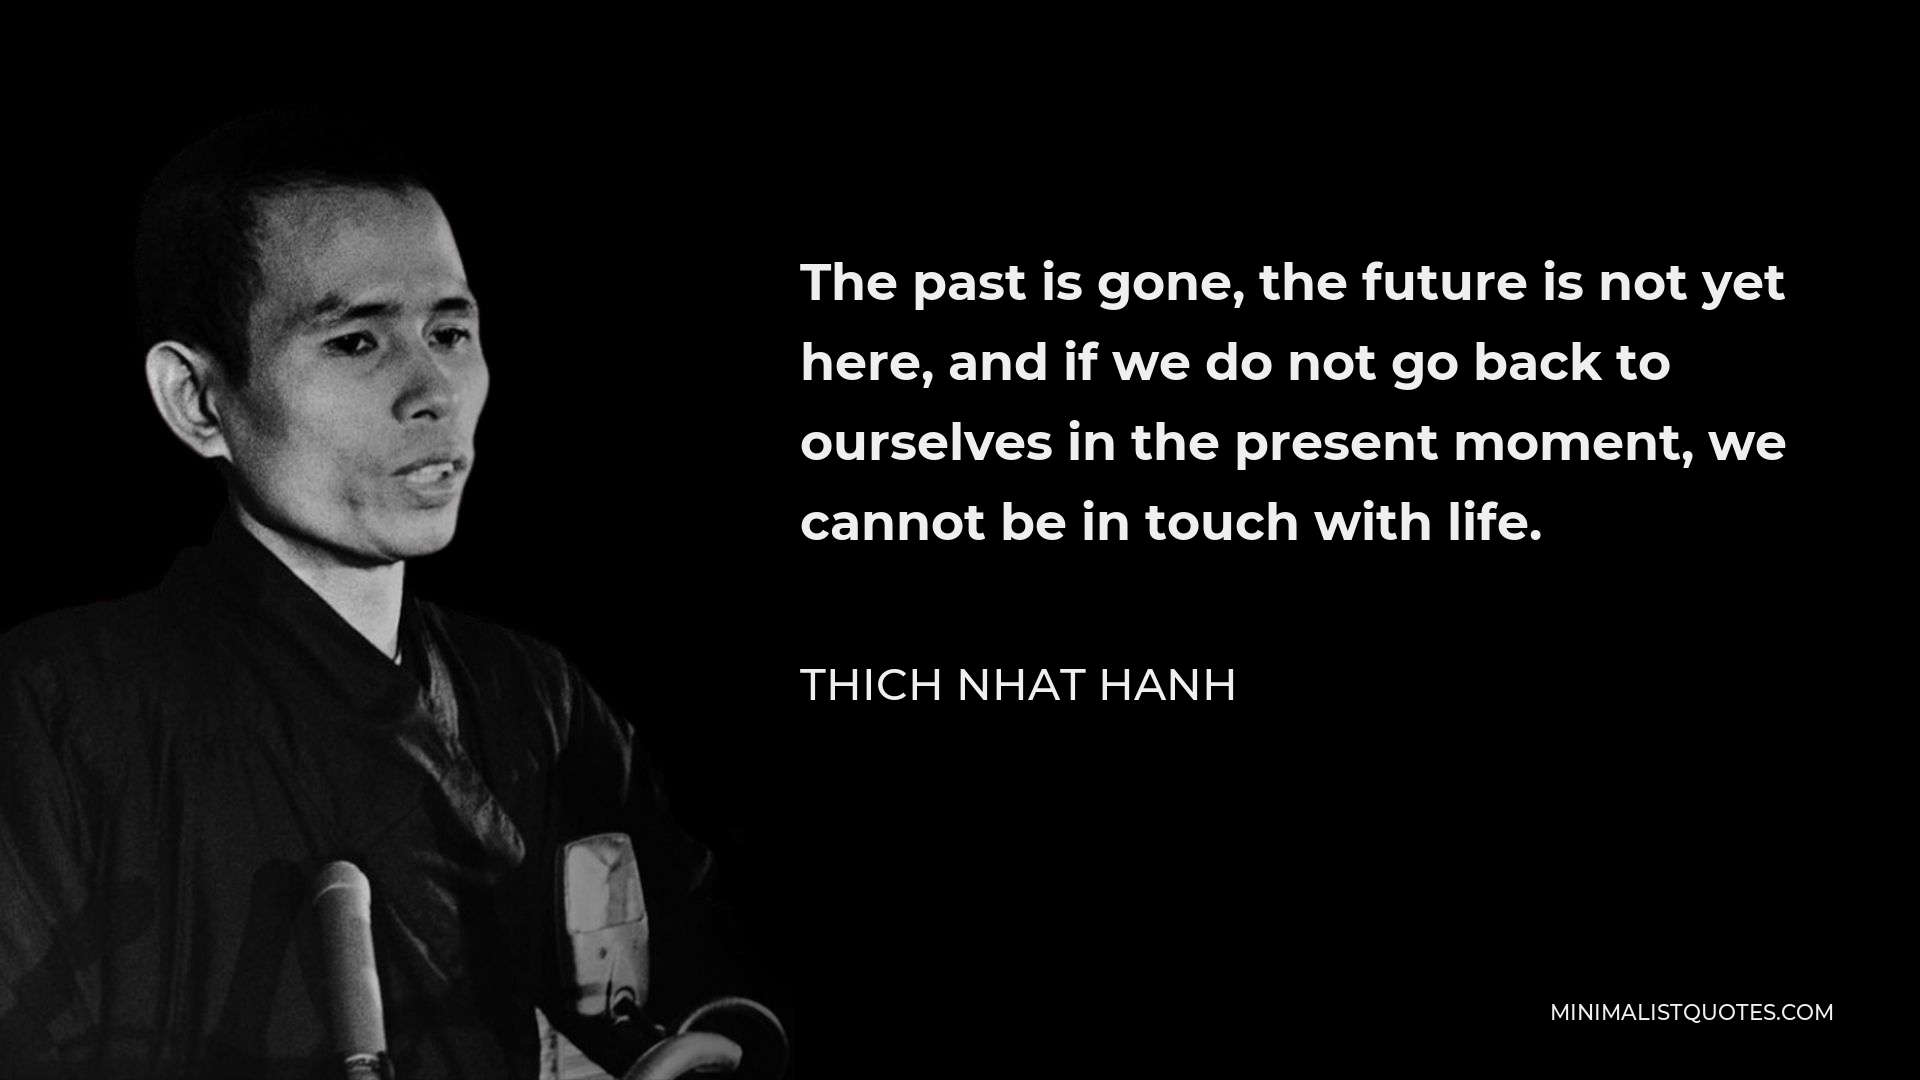 Thich Nhat Hanh Quote - The past is gone, the future is not yet here, and if we do not go back to ourselves in the present moment, we cannot be in touch with life.